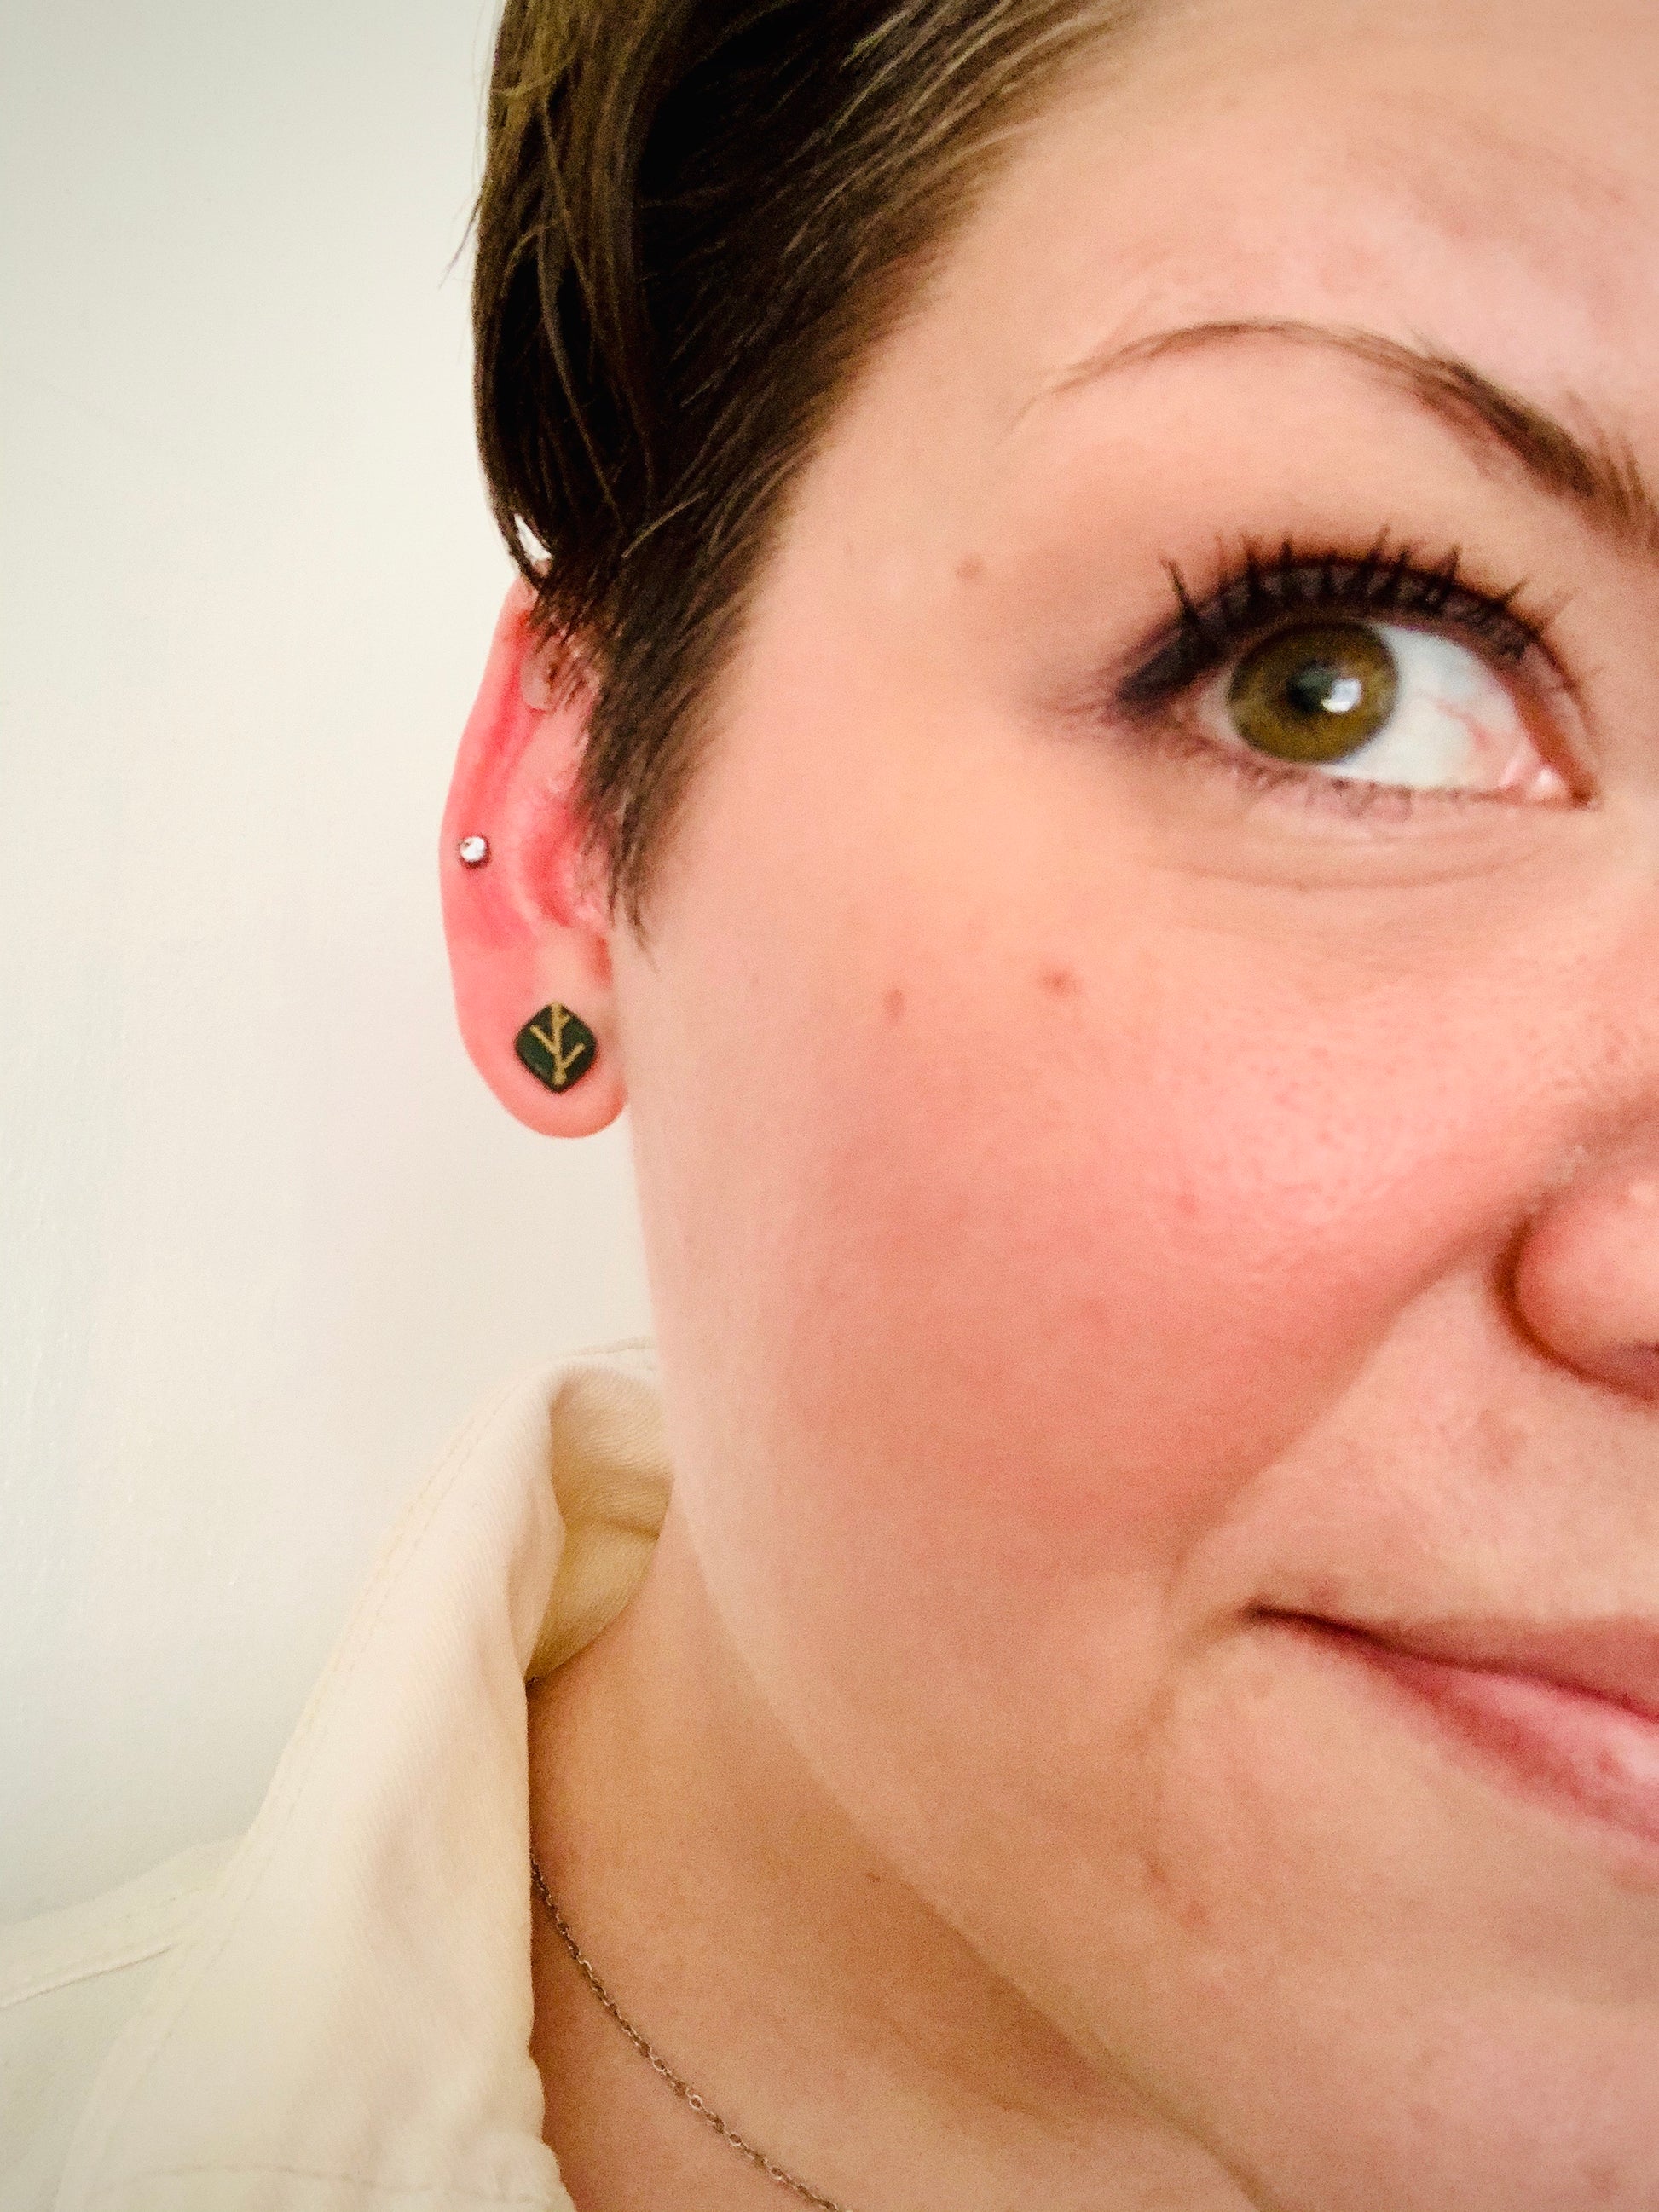 A close up of R+D owner Rebekah Thornhill. IYou can see on her earlobe a R+D earring shaped like a leaf. The 3D printed  leaf is olive green with gold veins.